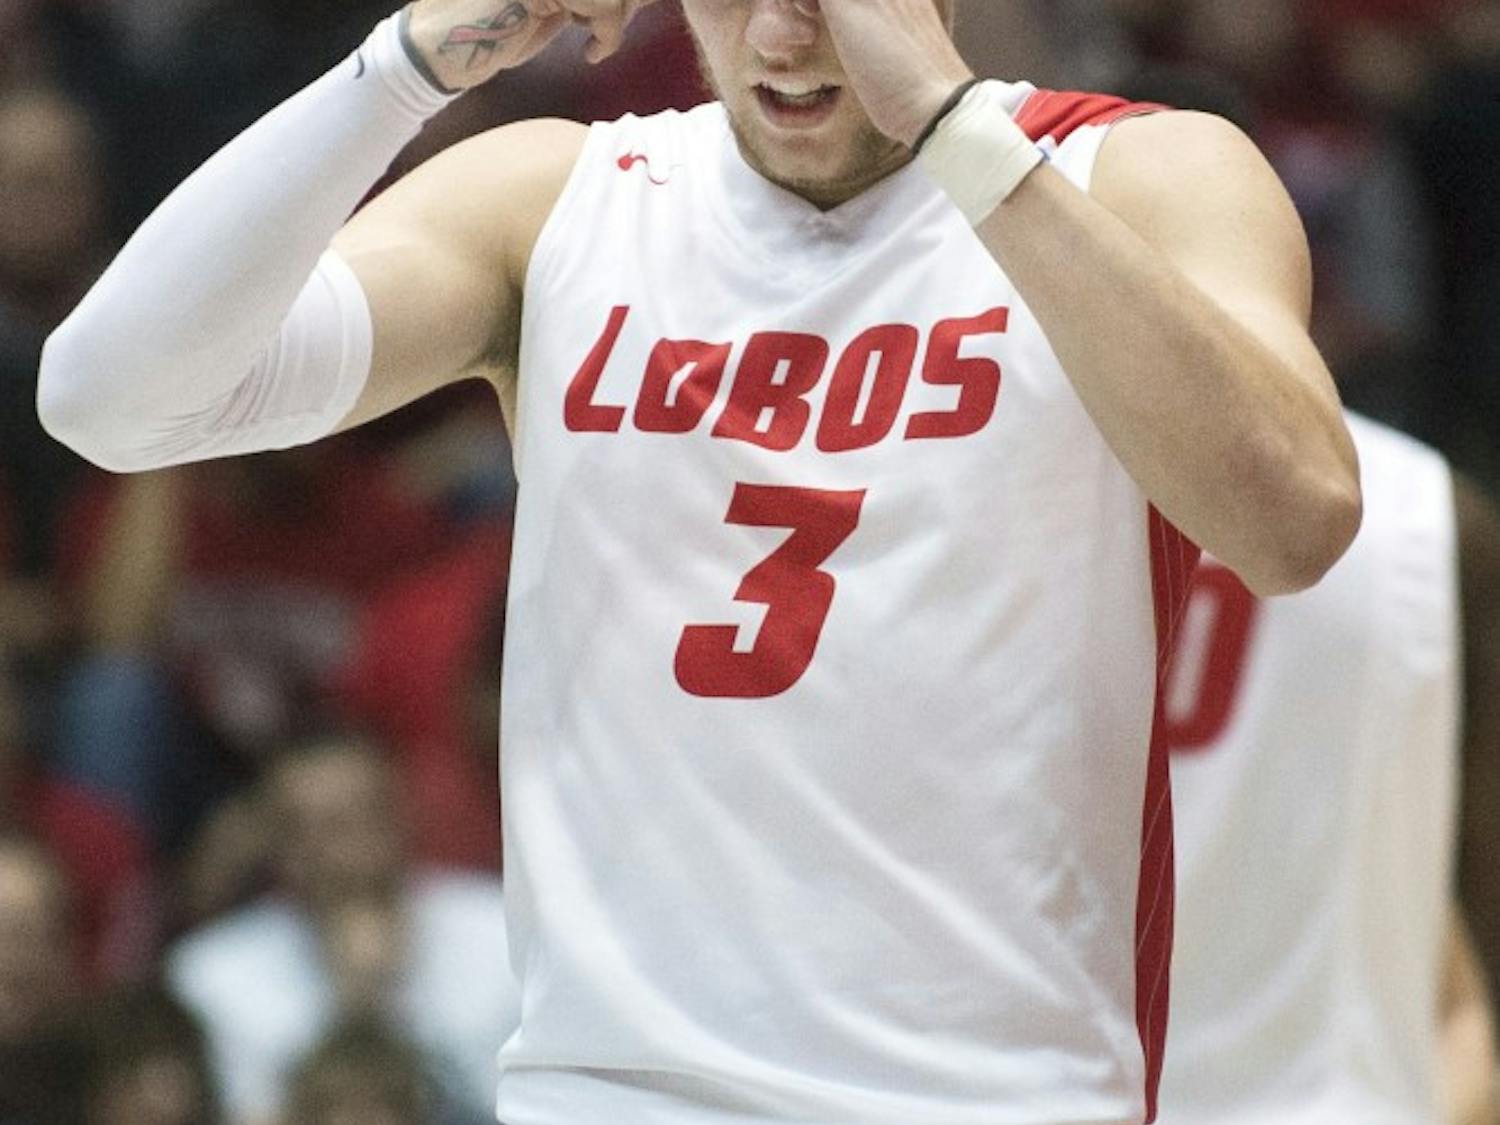 New Mexico guard Hugh Greenwood reacts after missing a field goal during the Jan. 18 game against Boise State. Greenwood had 23 points in the Lobos 63-62 overtime loss to the first-place Wyoming Cowboys in Laramie, Wyoming on Saturday.
